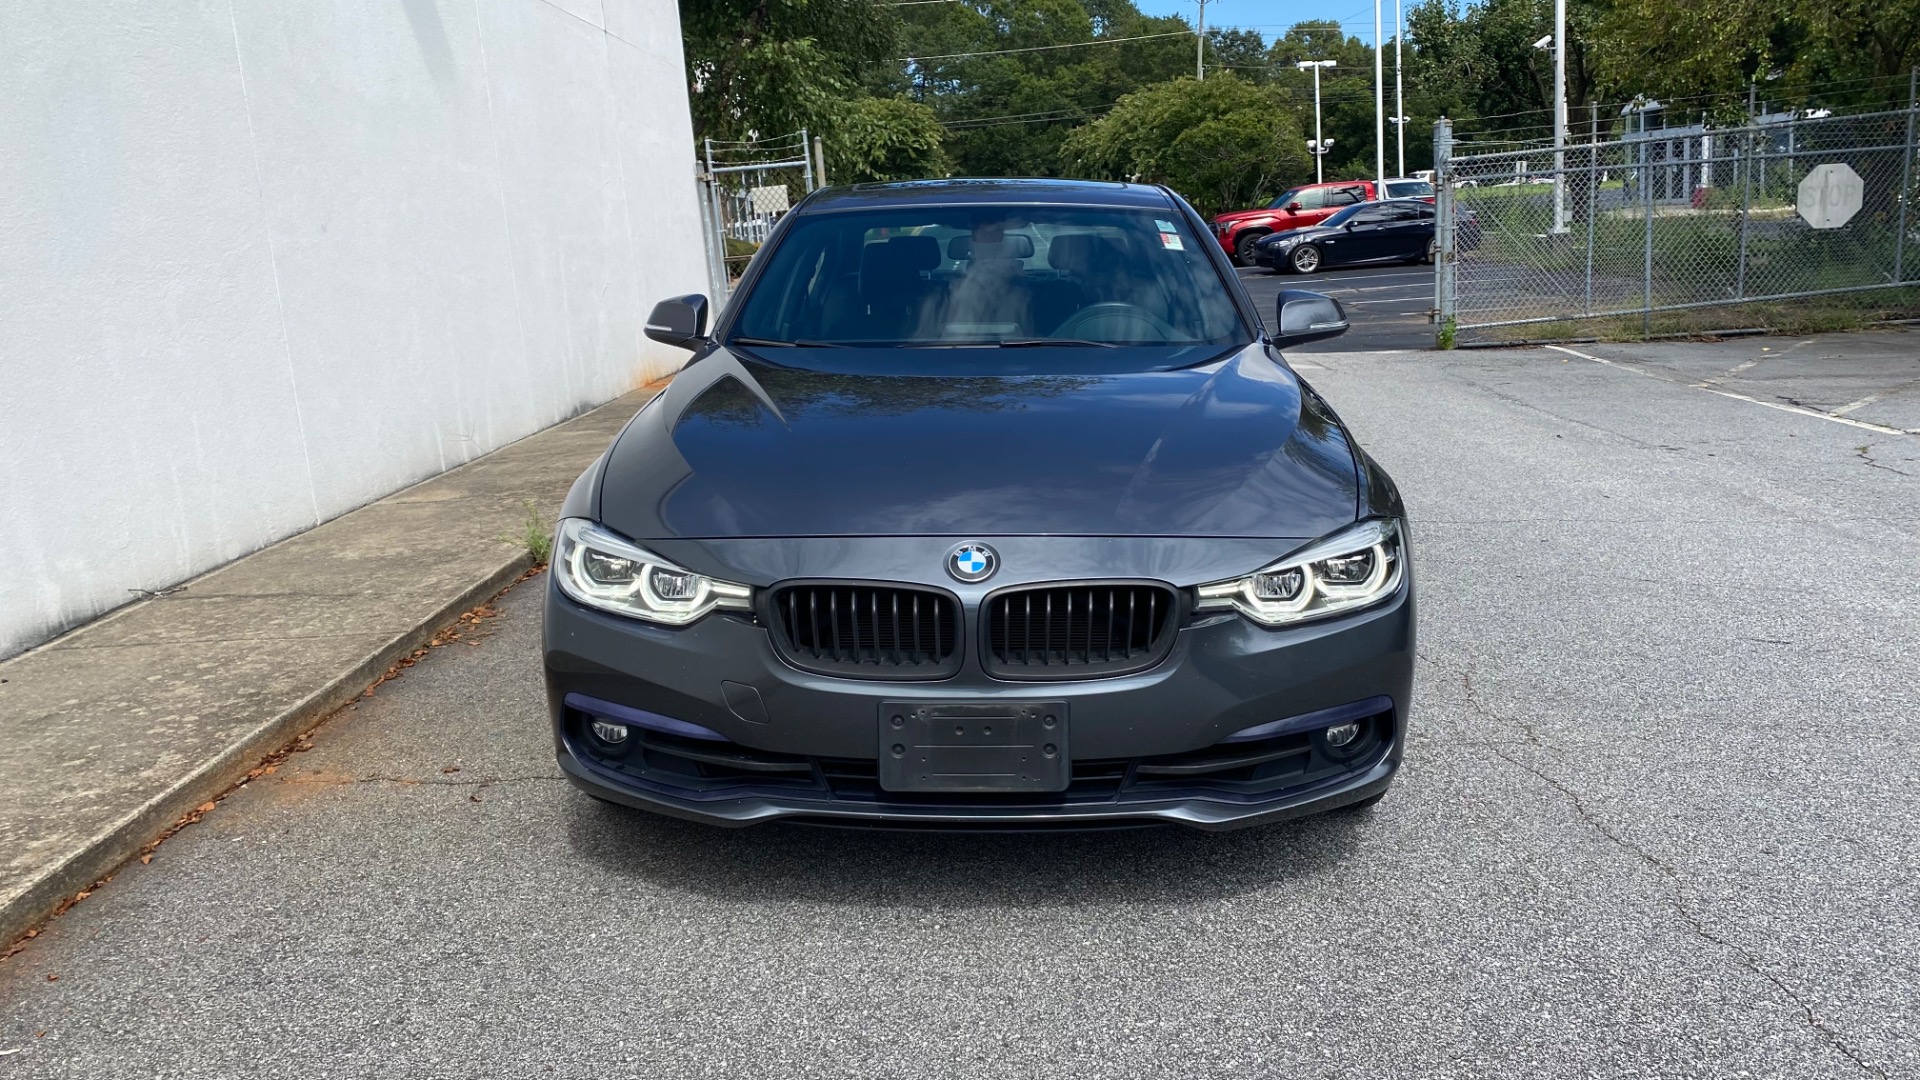 Used 2018 BMW 3 SERIES 330I XDRIVE / CONV PKG / SUNROOF / SPORT STS / HTD STS / REARVIE for sale Sold at Formula Imports in Charlotte NC 28227 12